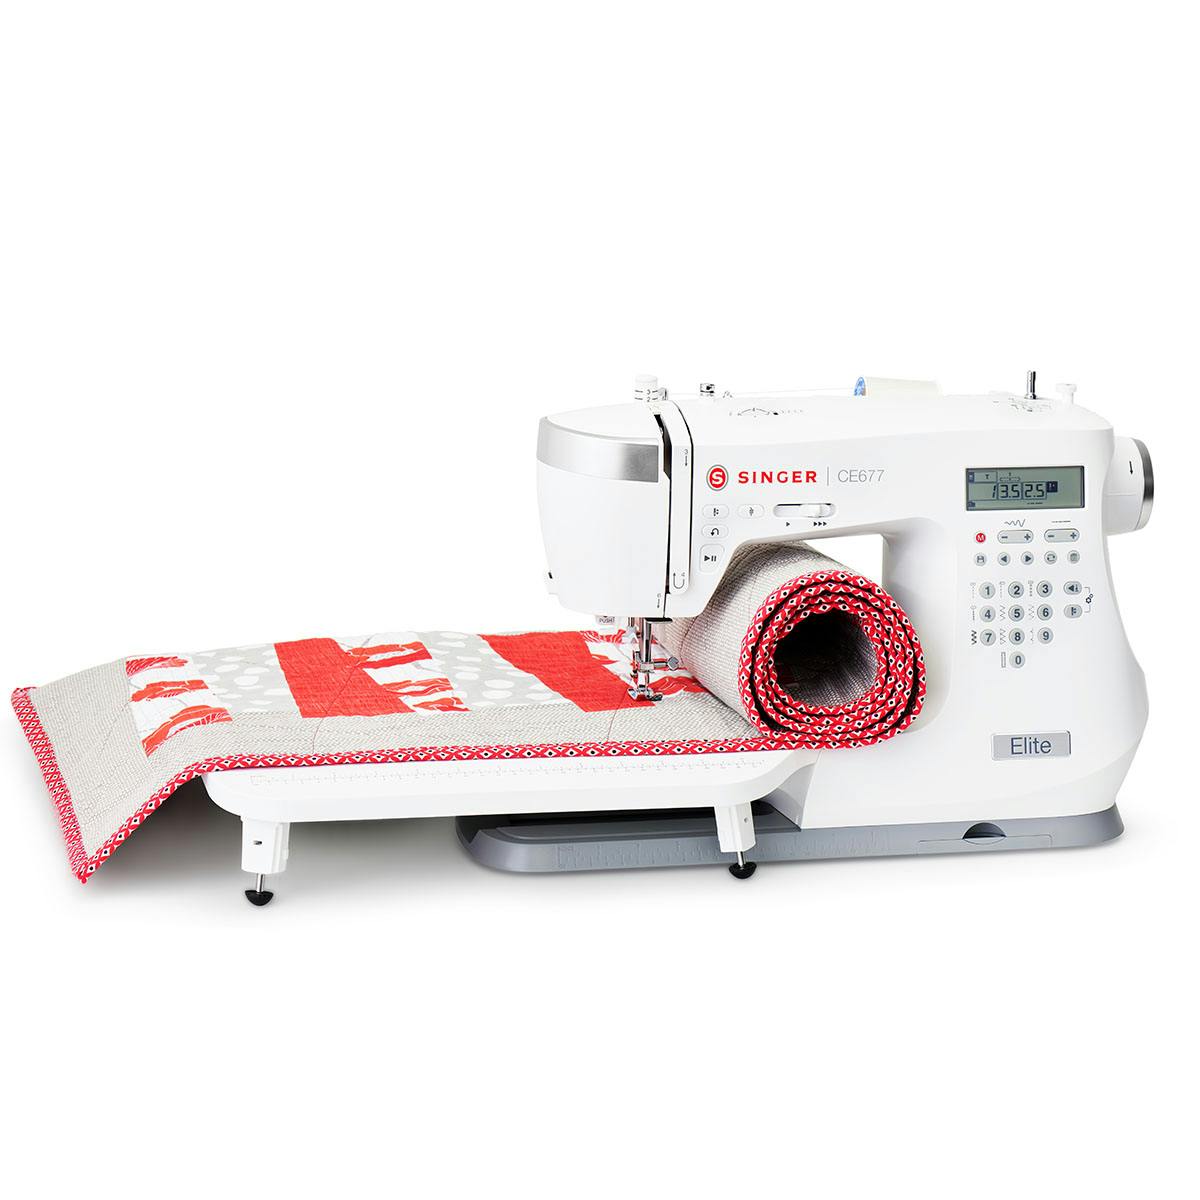 Singer Elite CE677 computerized sewing machine with quilt